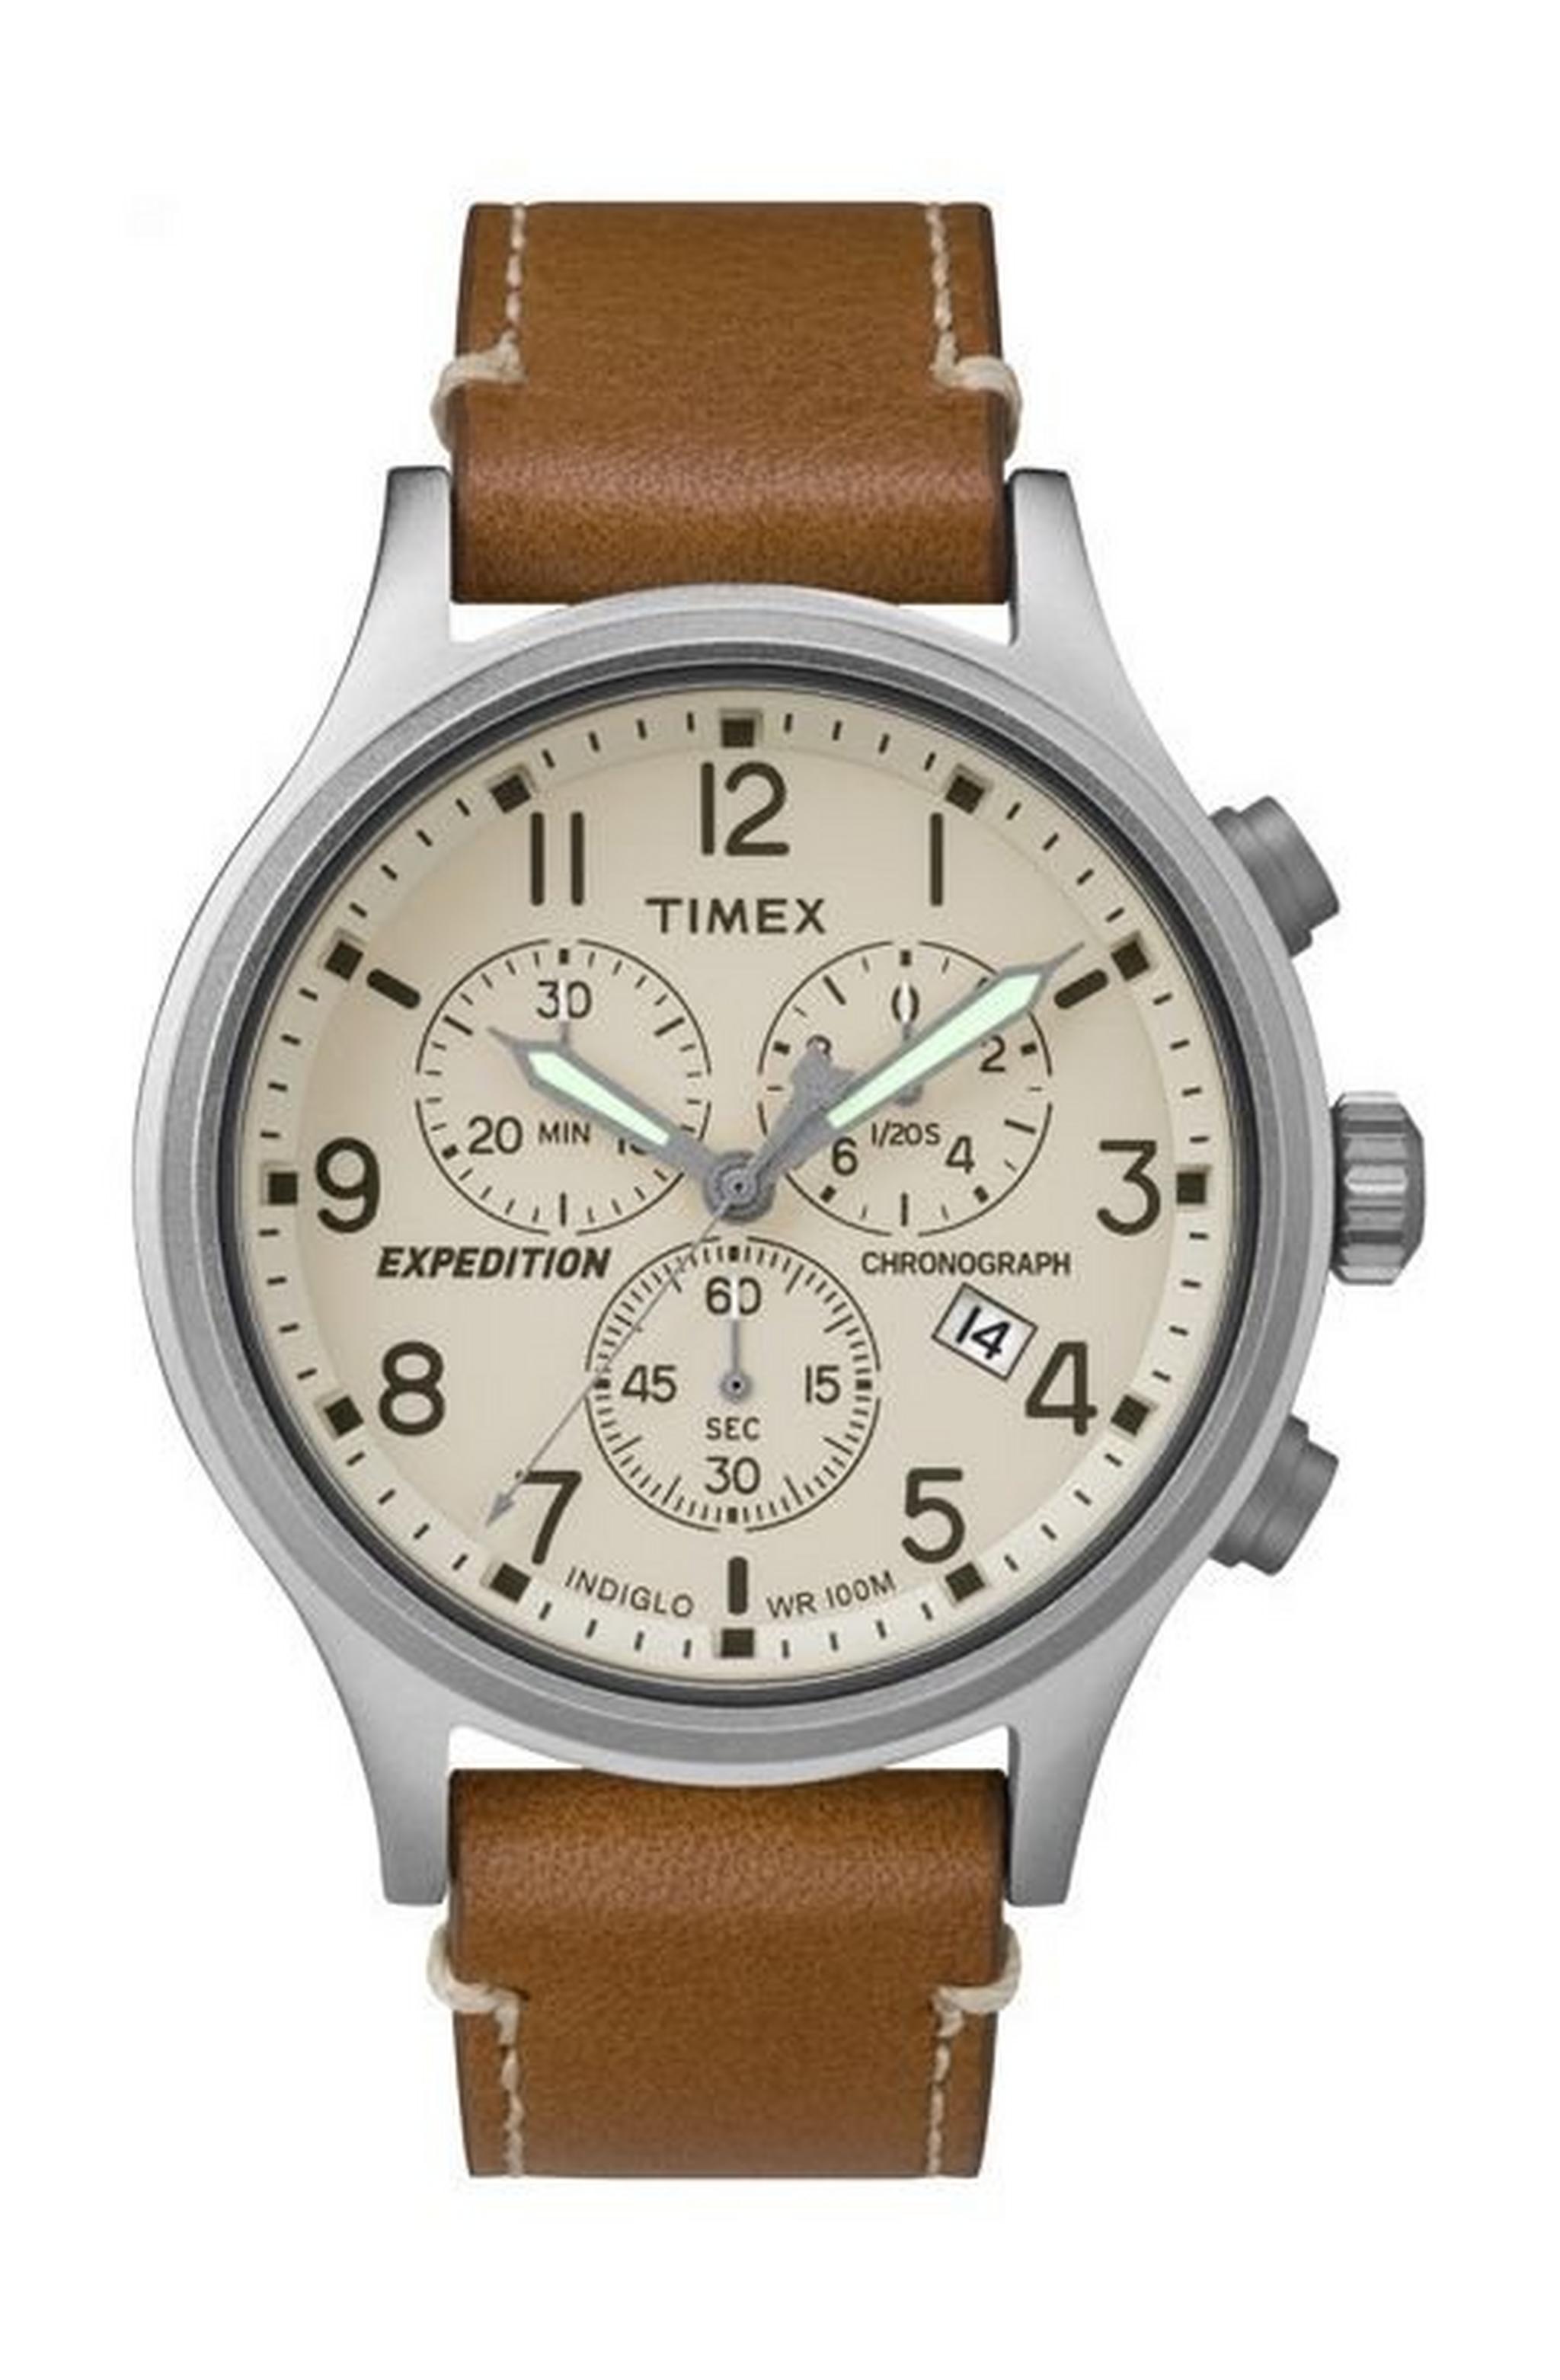 Timex TW4B09200 Expedition Shock Chronograph  Gents Watch – Leather Strap - Tan